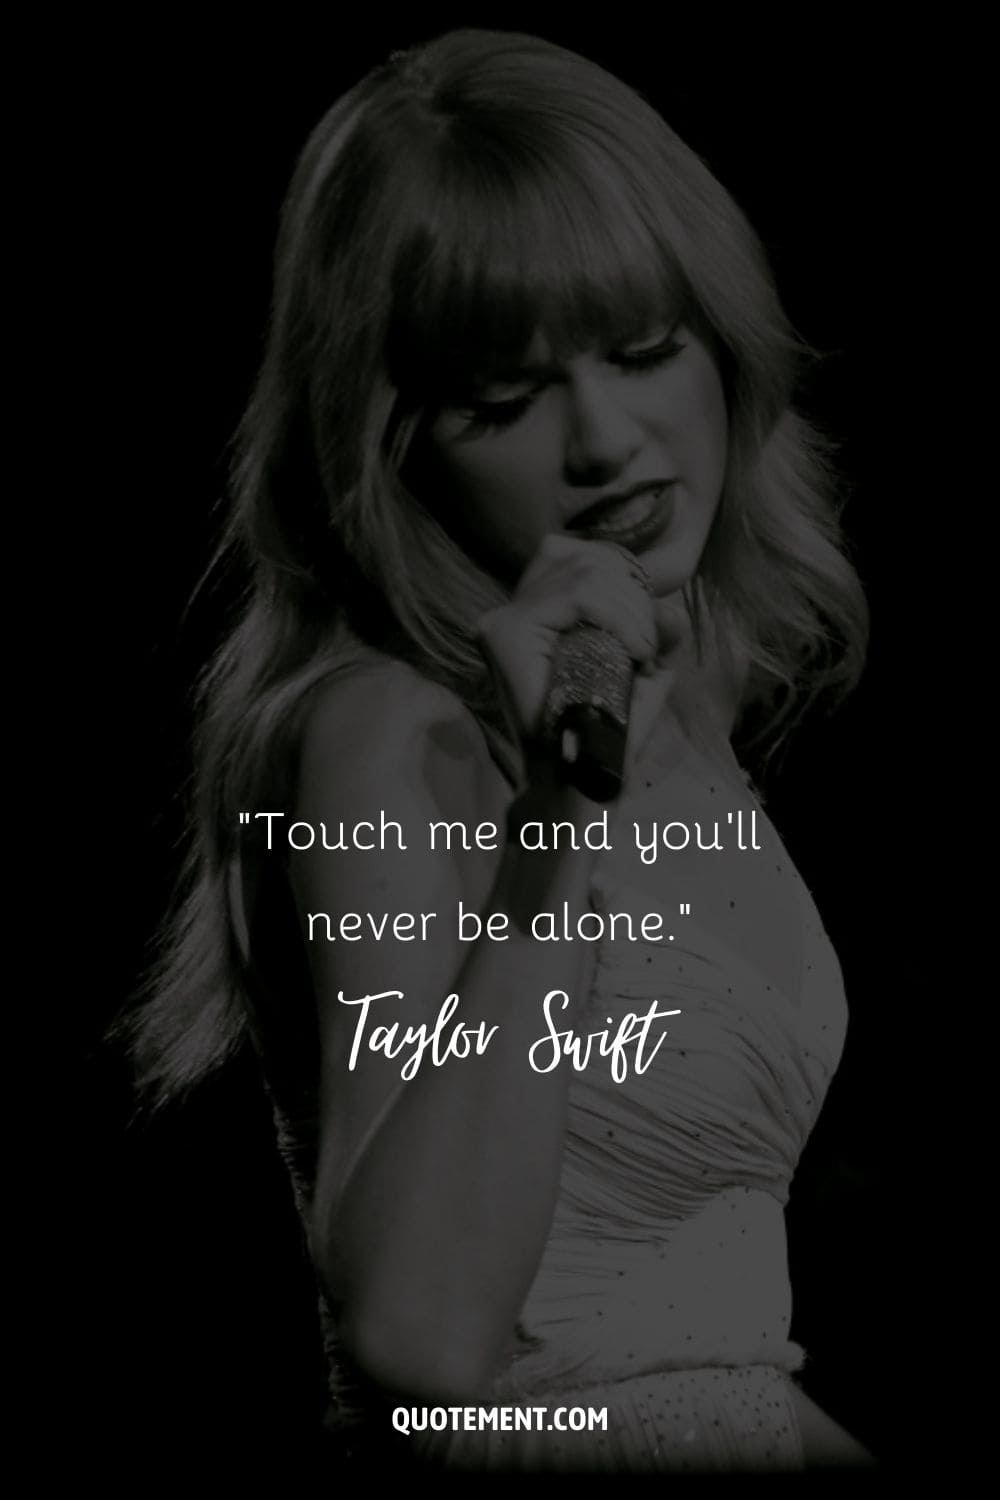 “Touch me and you'll never be alone.” ― Taylor Swift